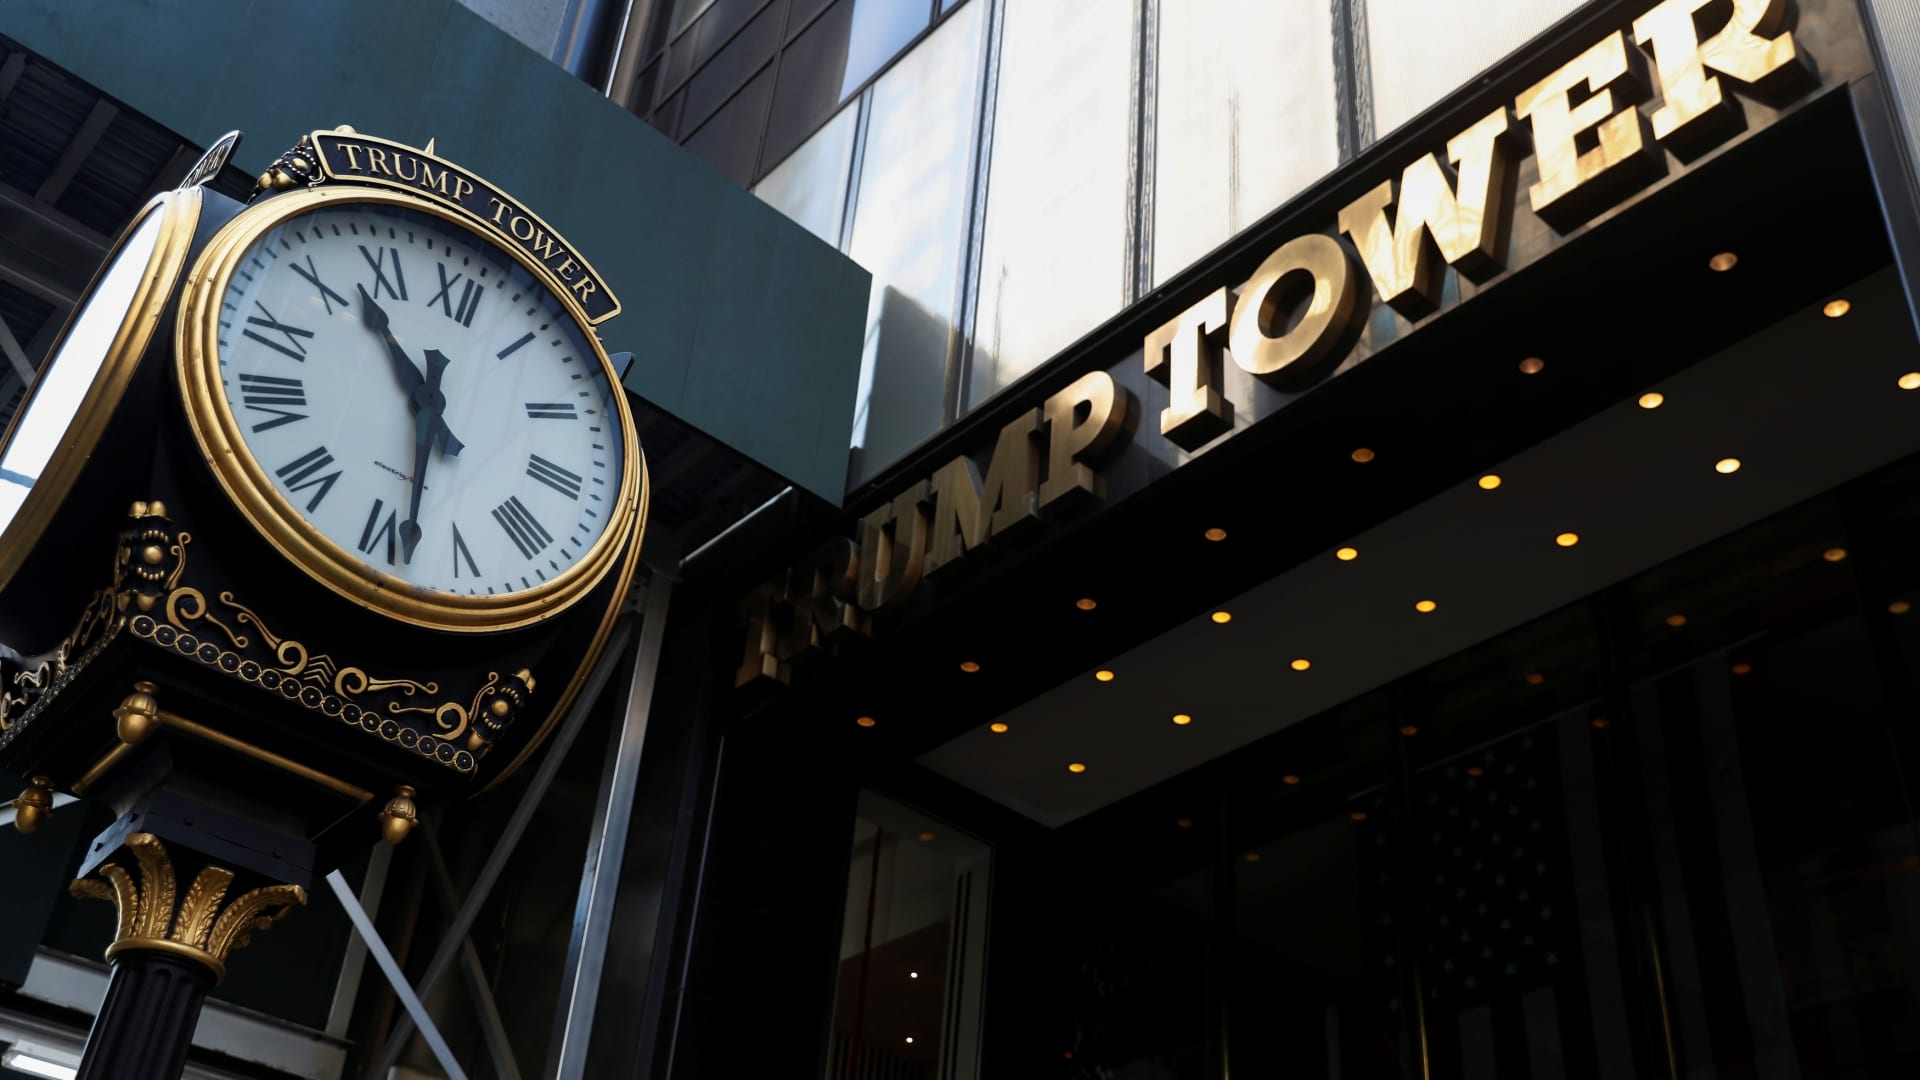 Judge approves independent monitor to oversee Trump Organization financial reporting, a victory for New York AG